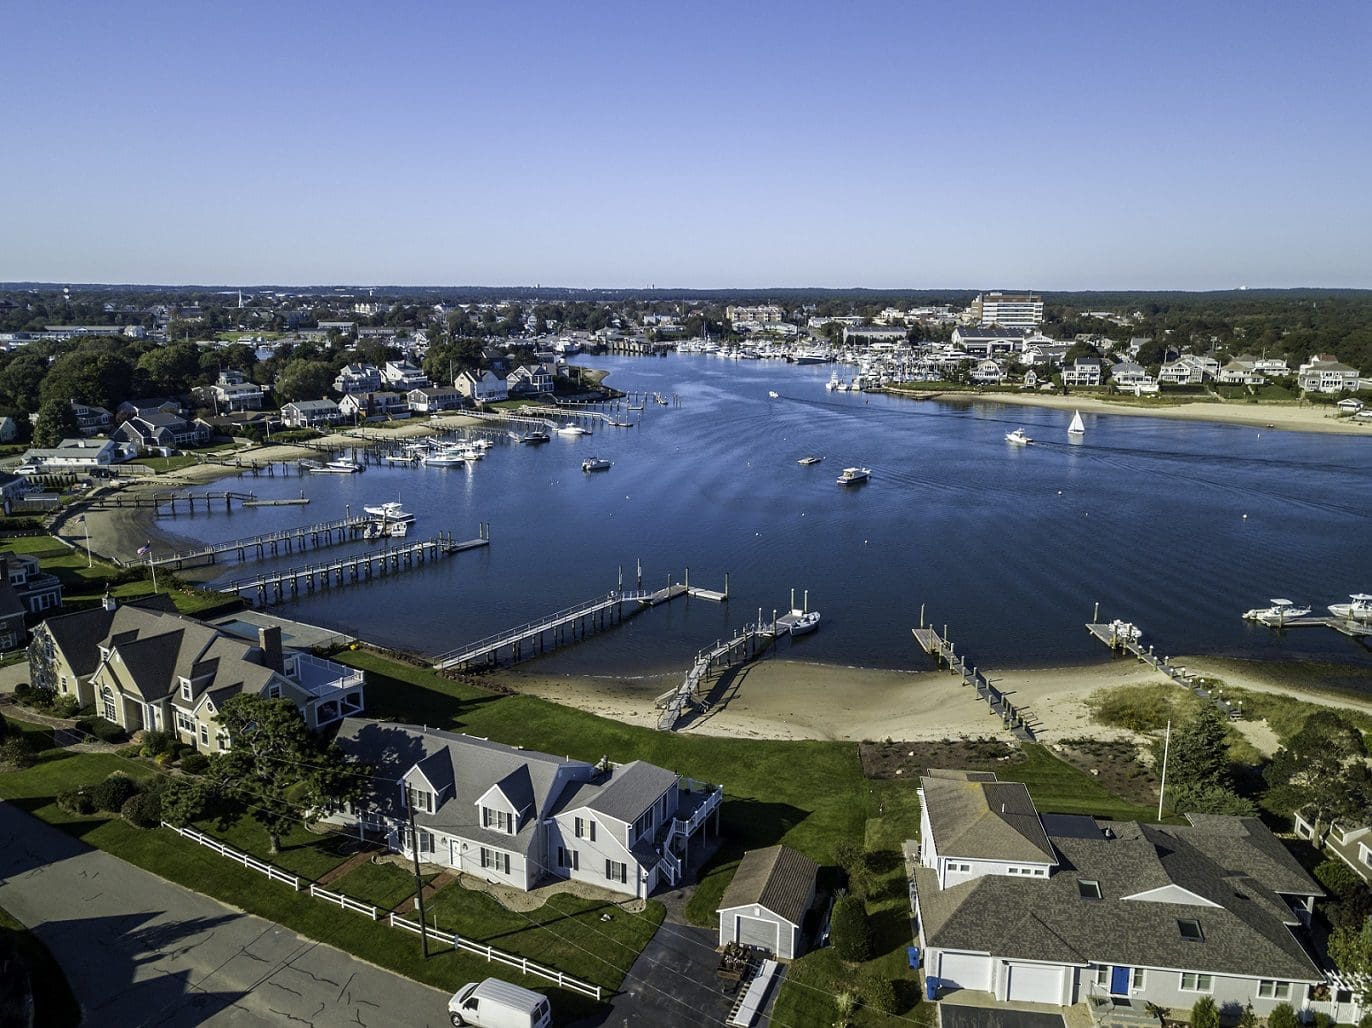 Why is Cape Cod so popular?